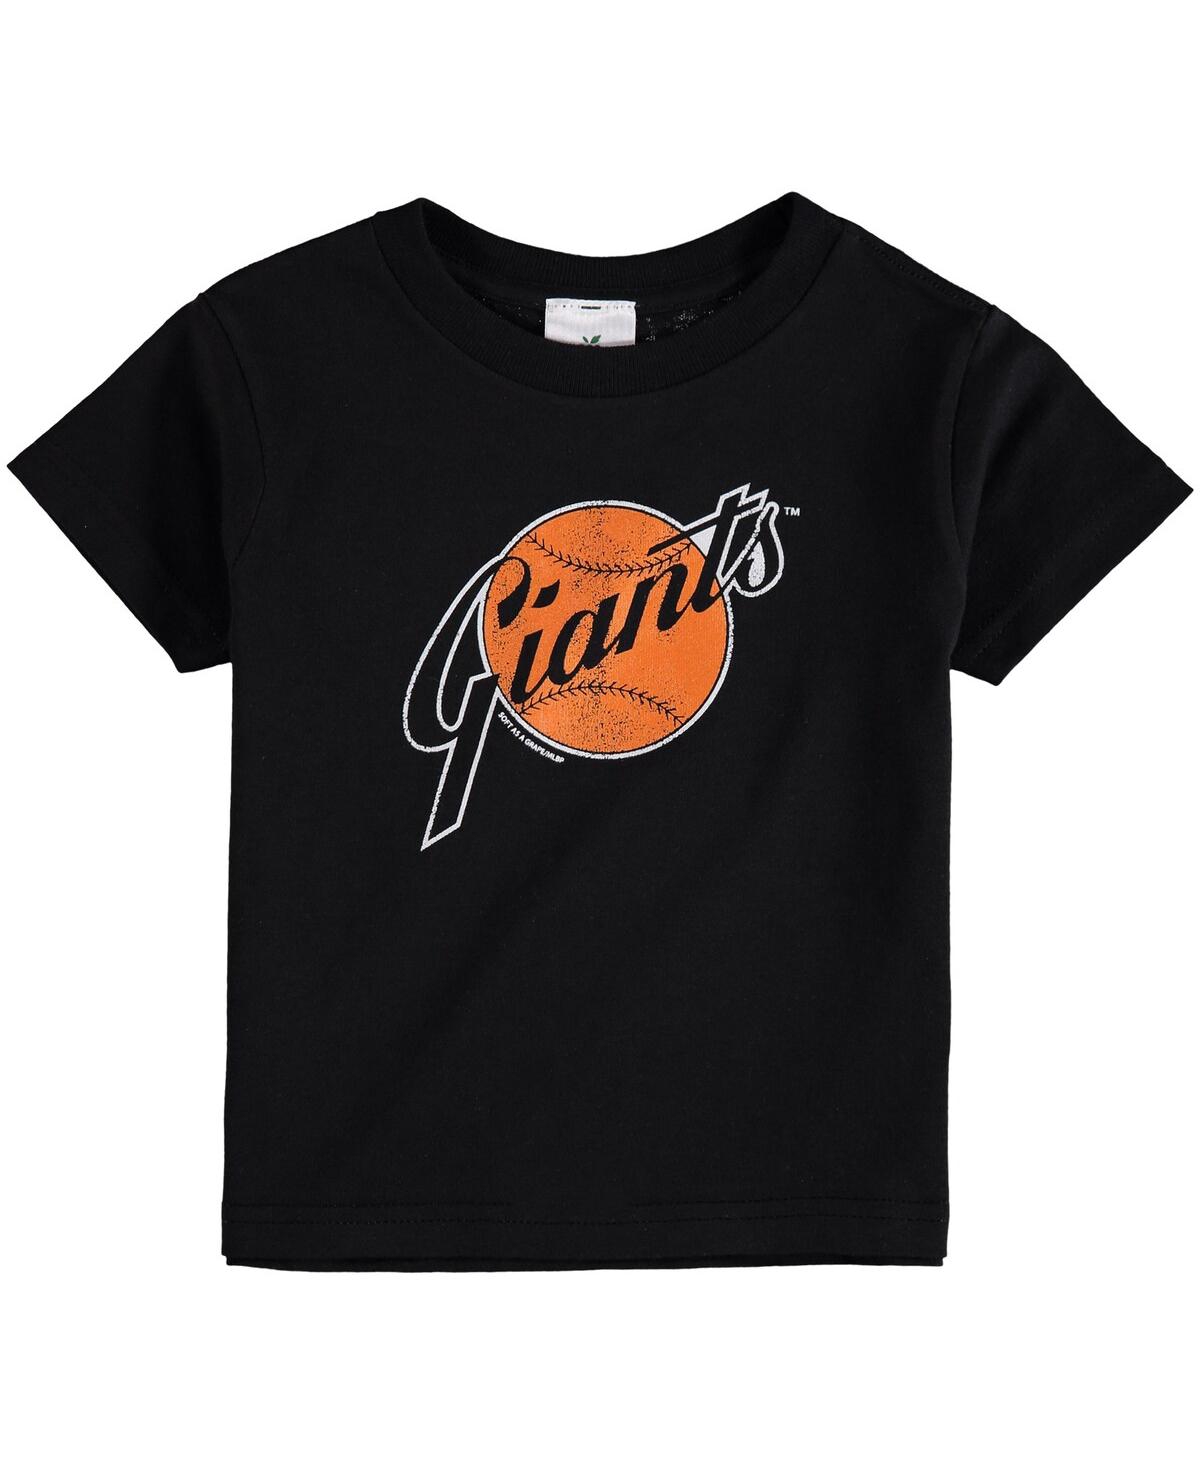 Shop Soft As A Grape Toddler Boys And Girls  Black San Francisco Giants Cooperstown Collection Shutout T-s